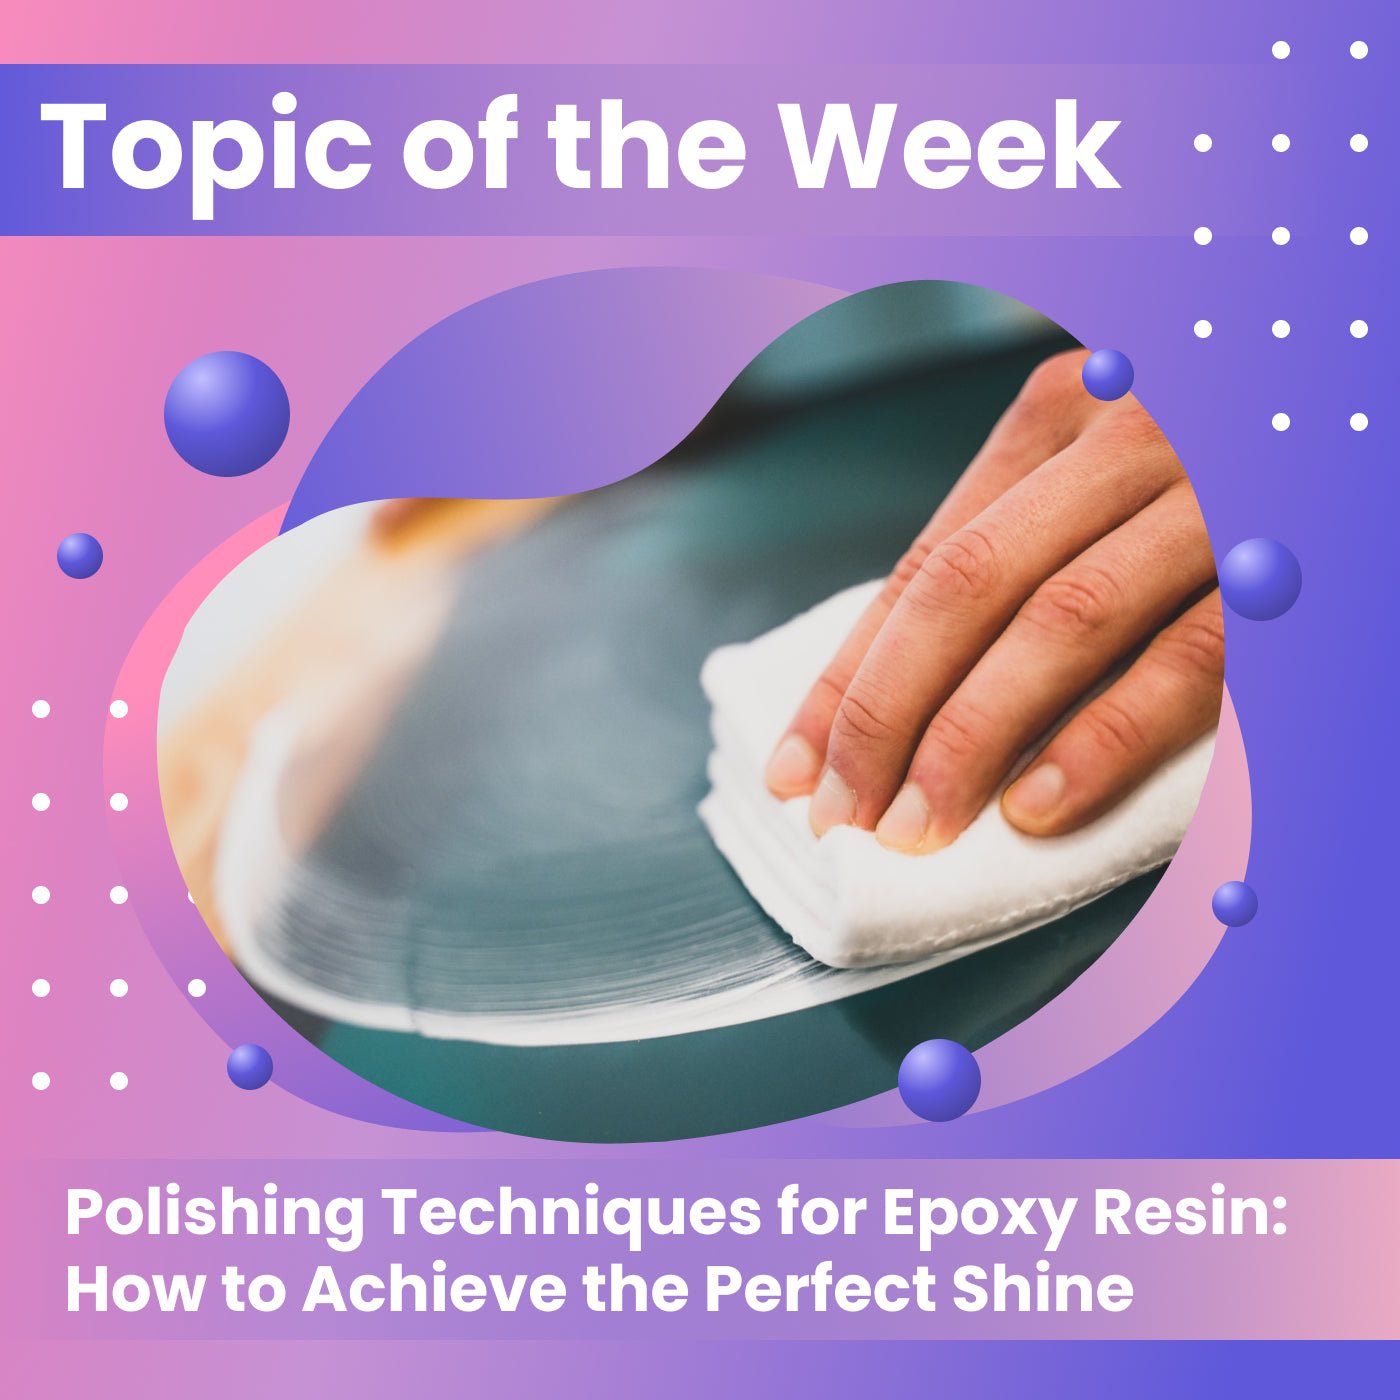 Polishing Techniques for Epoxy Resin: How to Achieve the Perfect Shine - Craft Resin